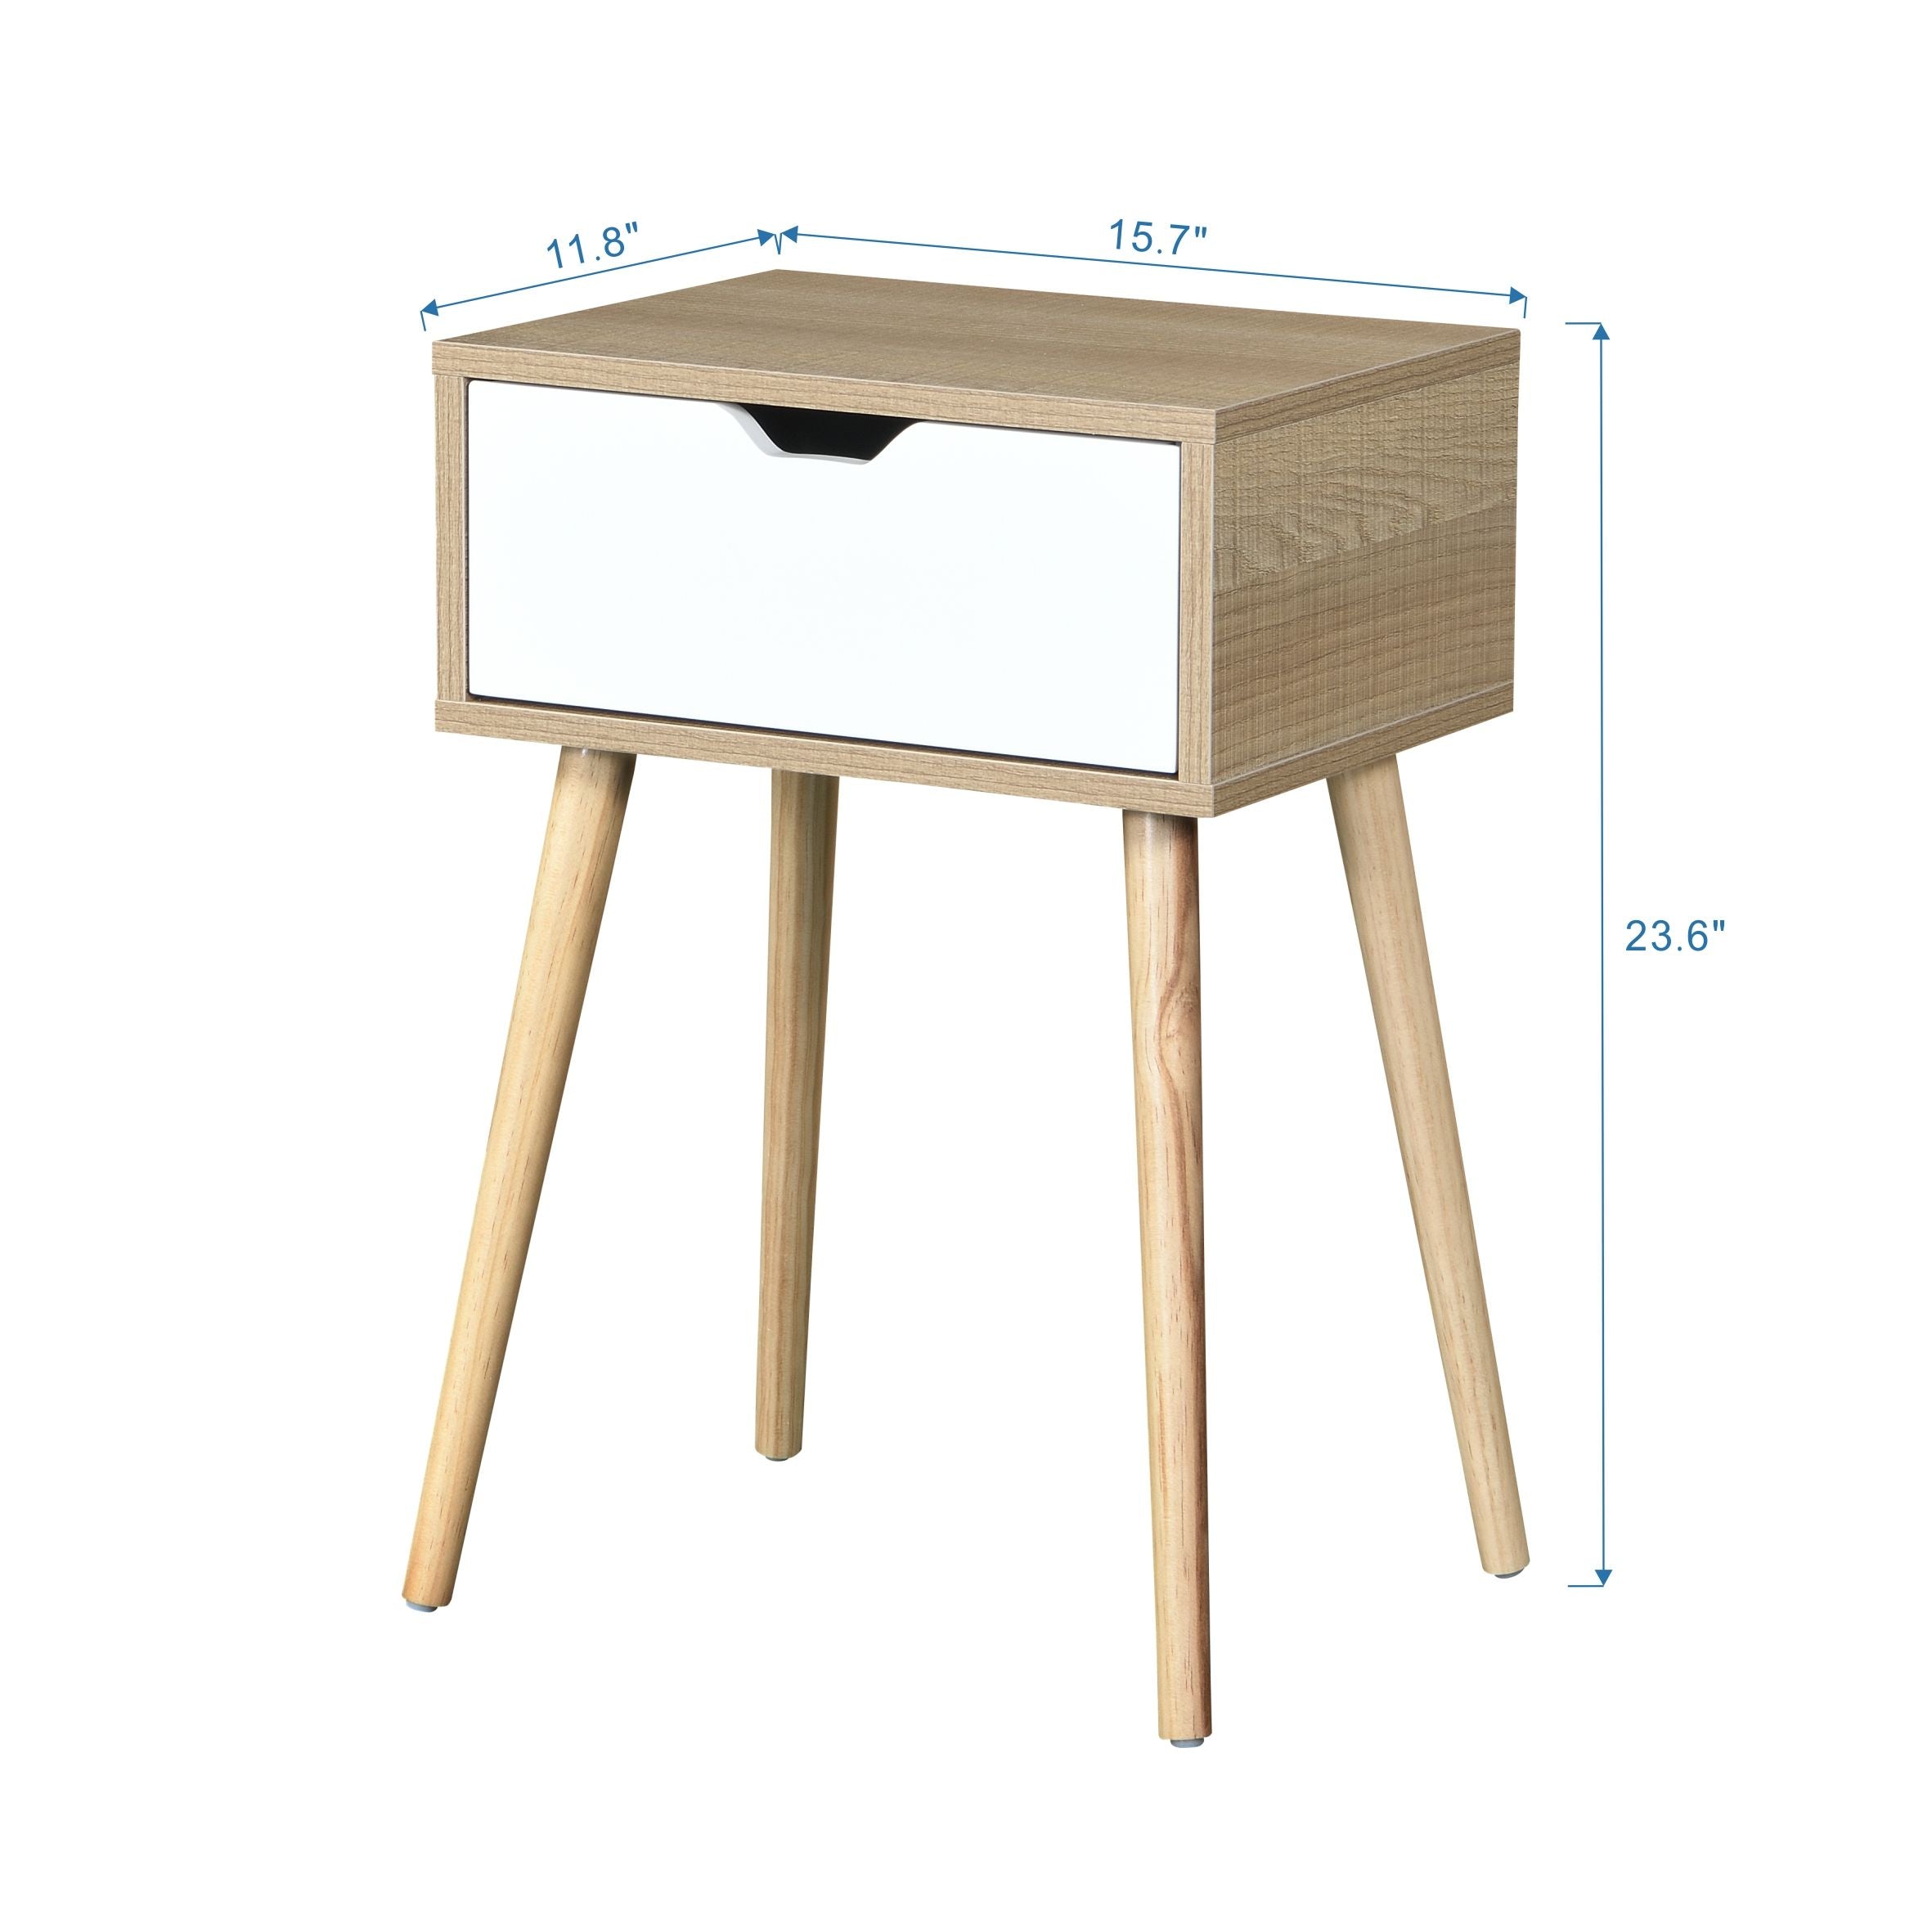 Side Table With 1 Drawer And Rubber Wood Legs, Mid - Century Modern Storage Cabinet For Bedroom Furniture - White With Solid Wood Color